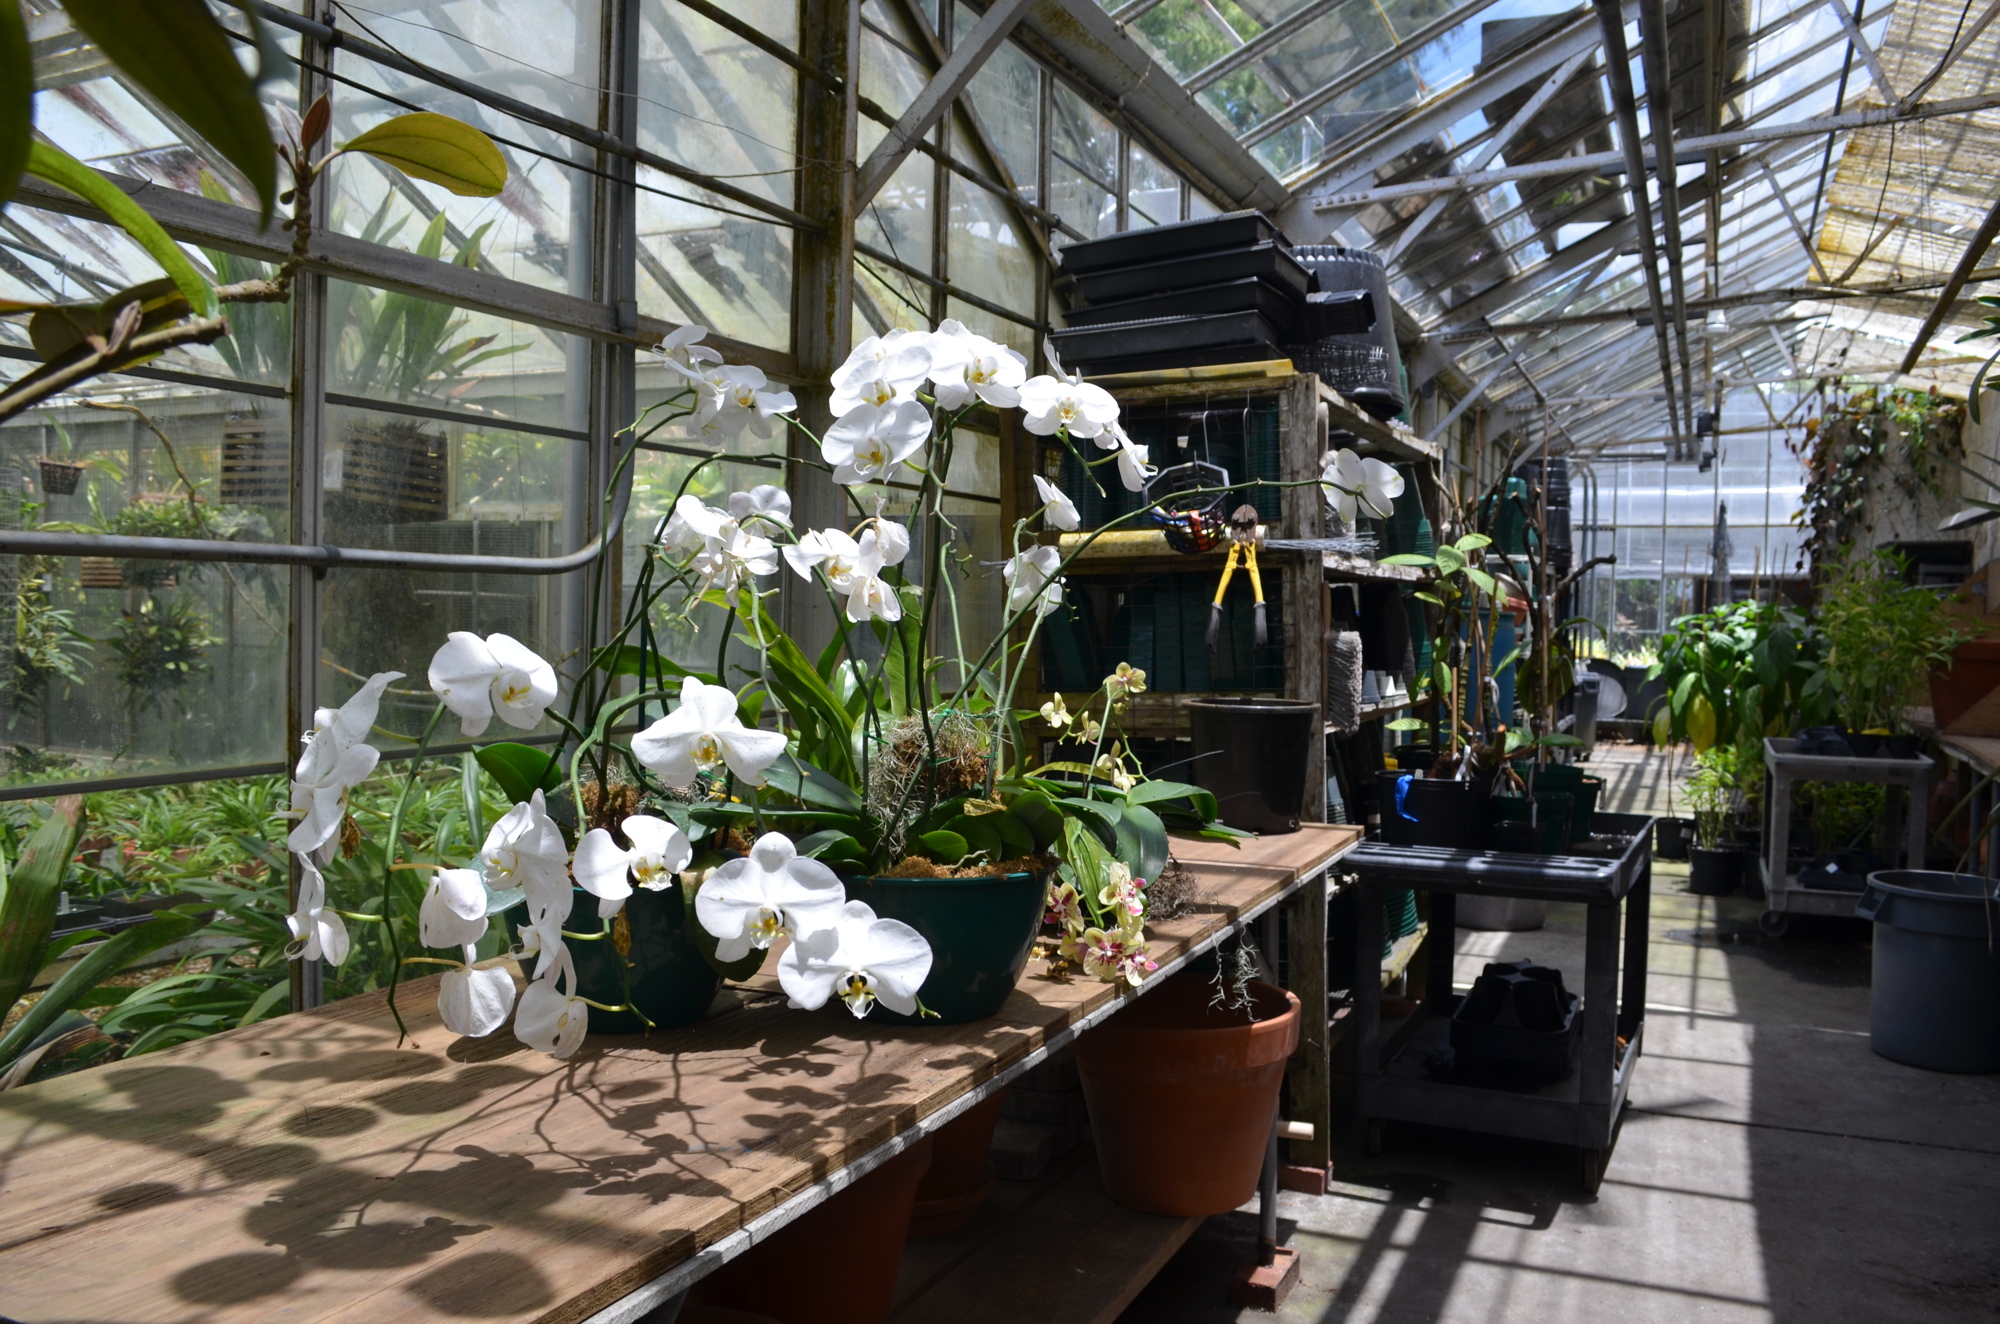 Orchids bloom in a workspace behind the conservatory.